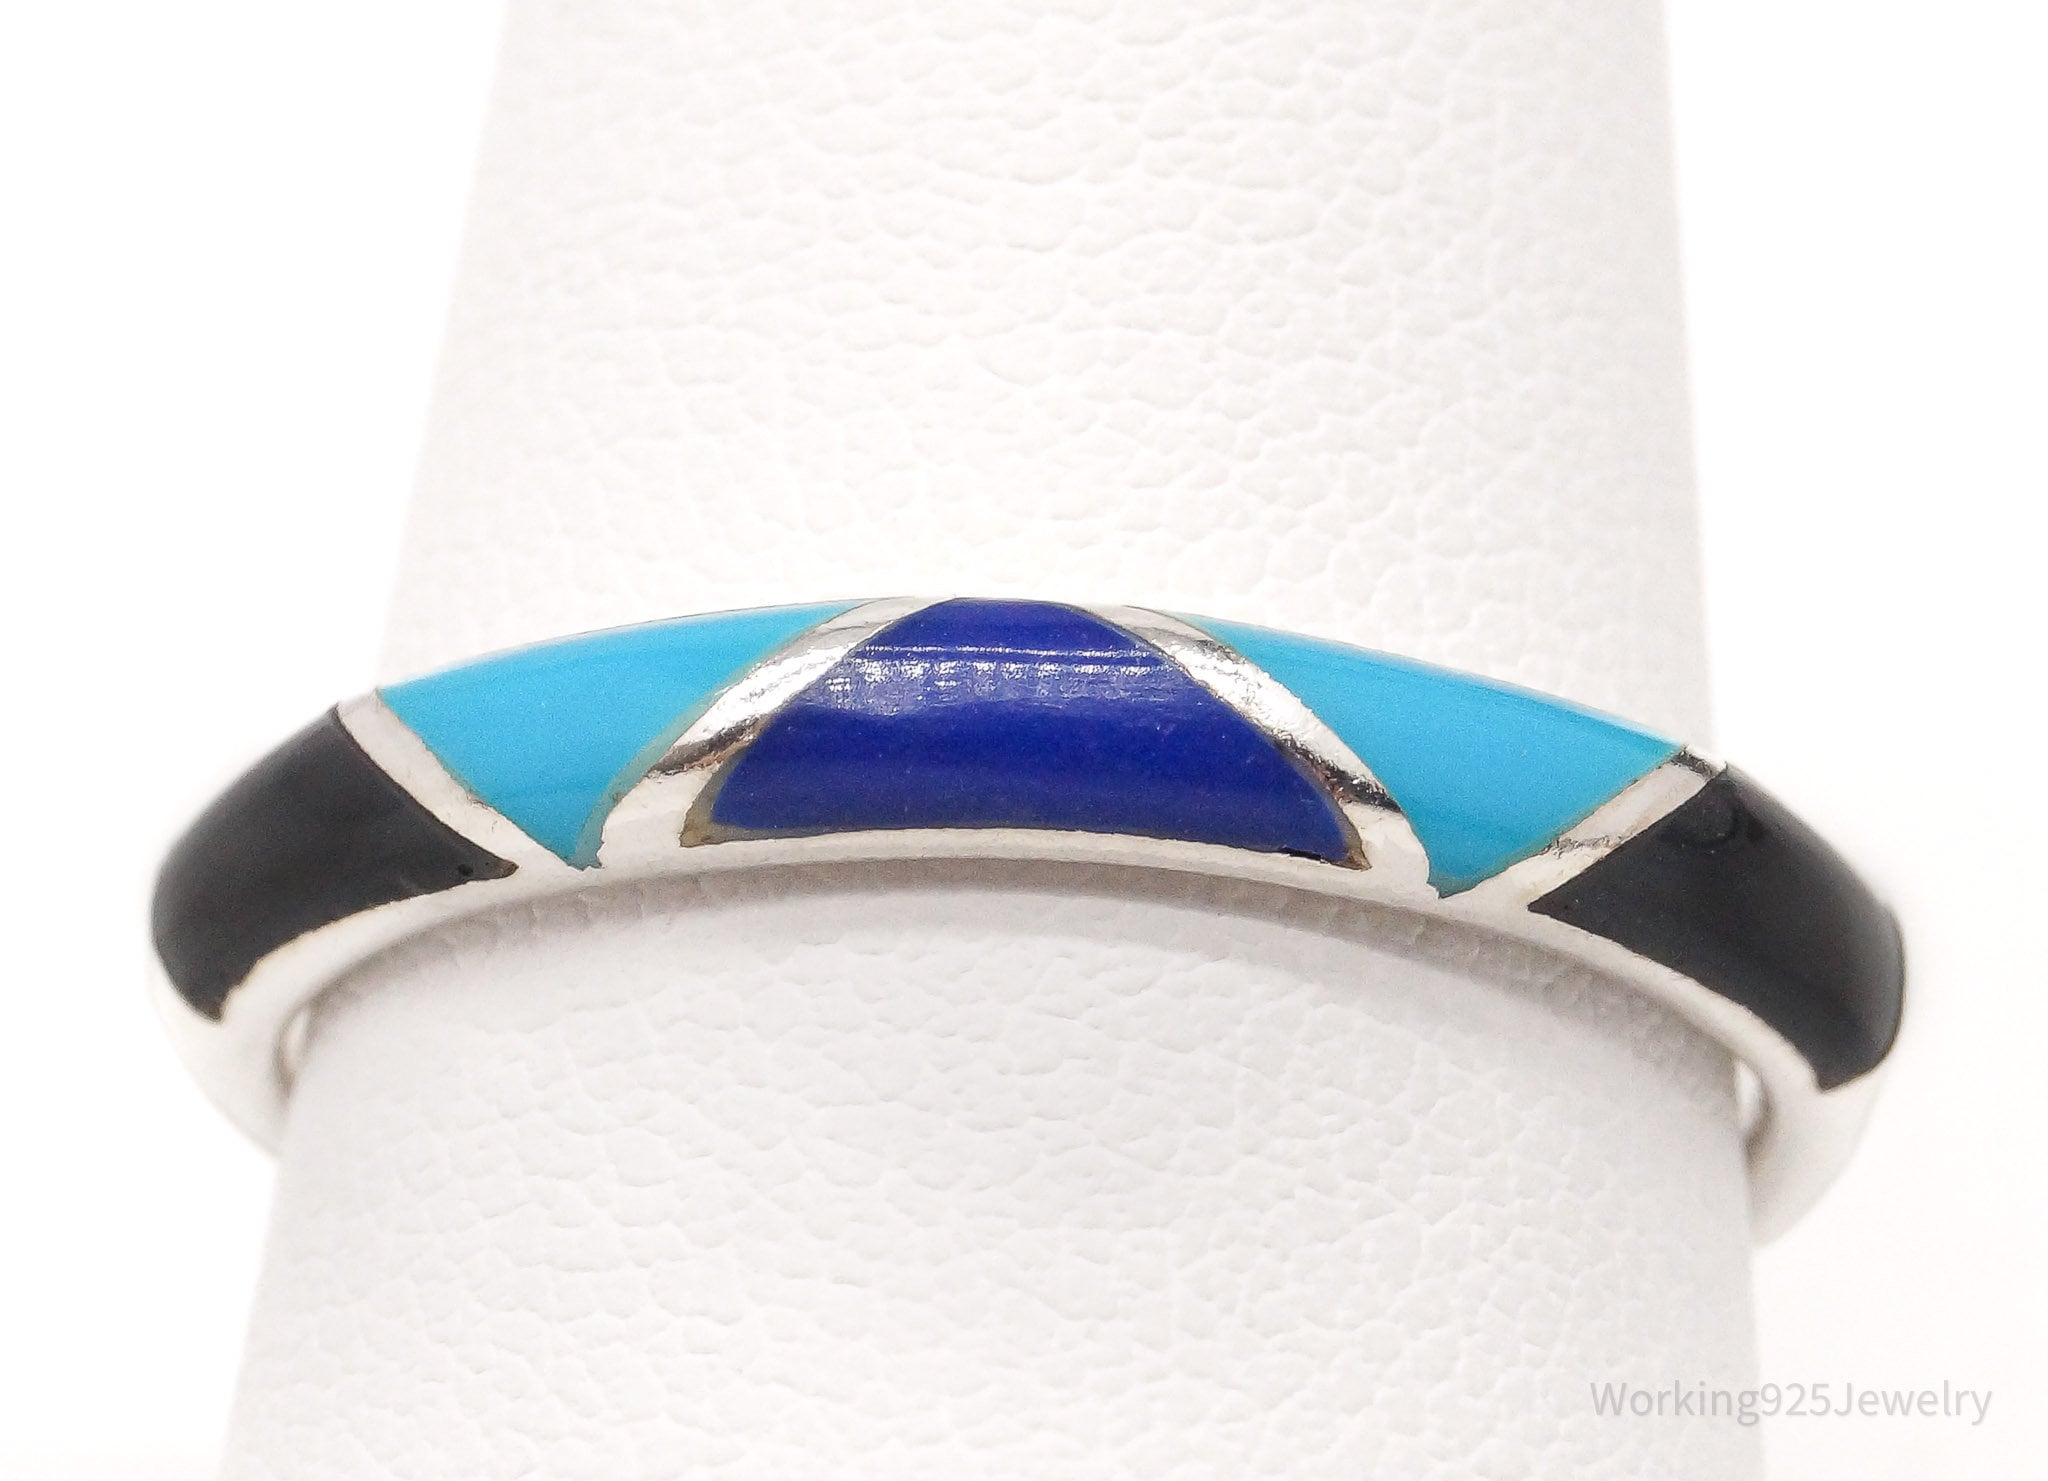 Vintage Turquoise Lapis Lazuli Black Onyx Inlay Sterling Silver Ring - Size 10